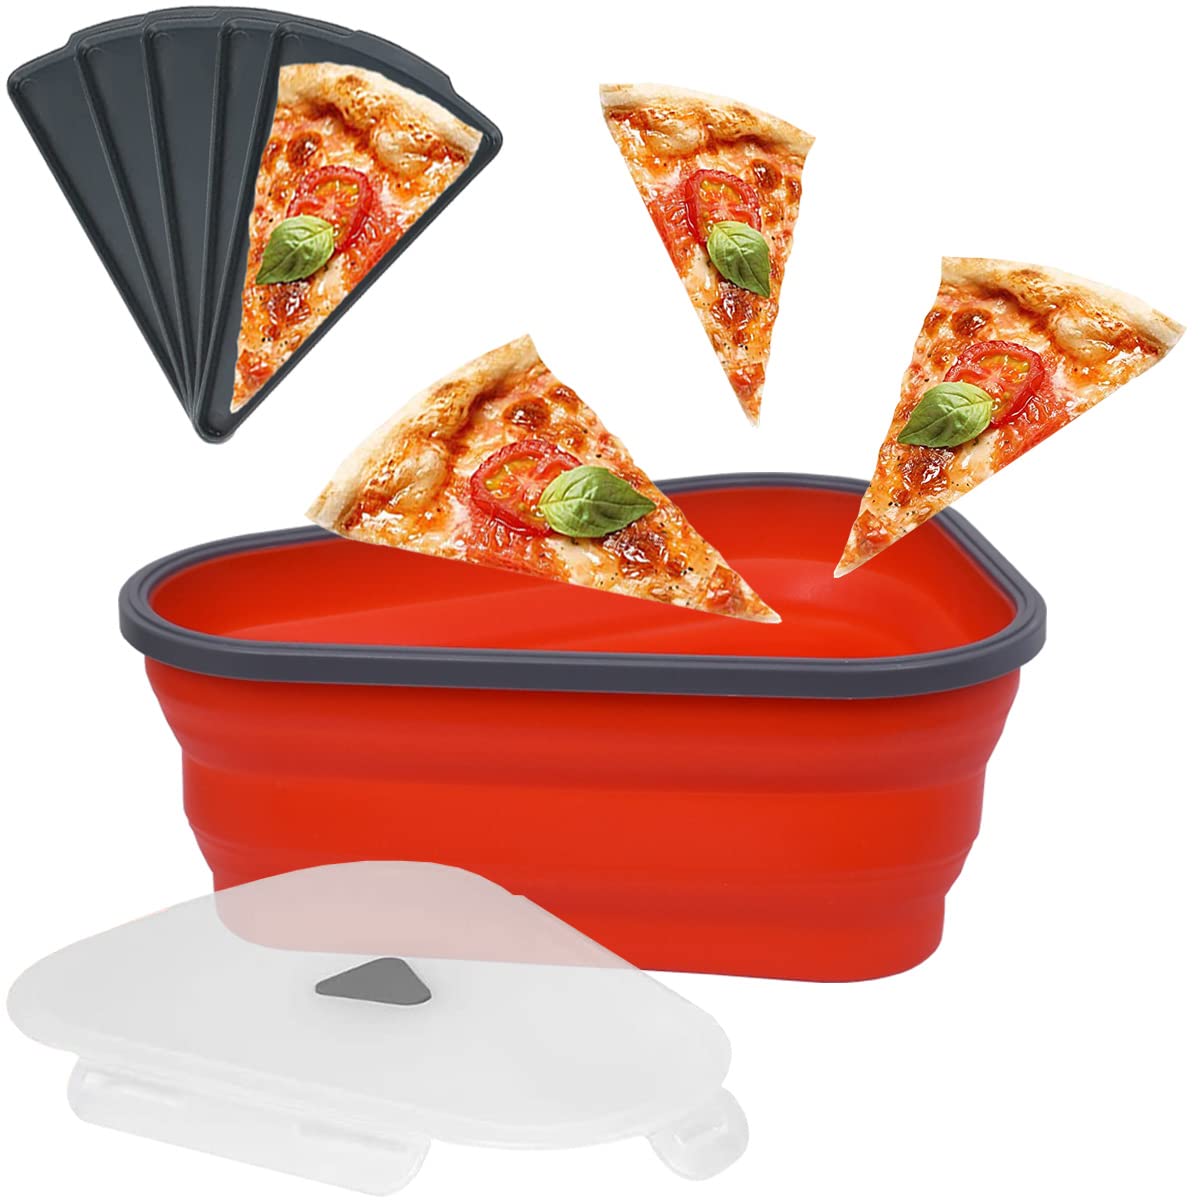 Pizza Storage Container with Silicone, Expandable and Collapsible Pizza Container with 5 Microwavable Serving Trays, Pizza Holder Reusable and Save Space, Pizza Slice Container for Leftover (Red)